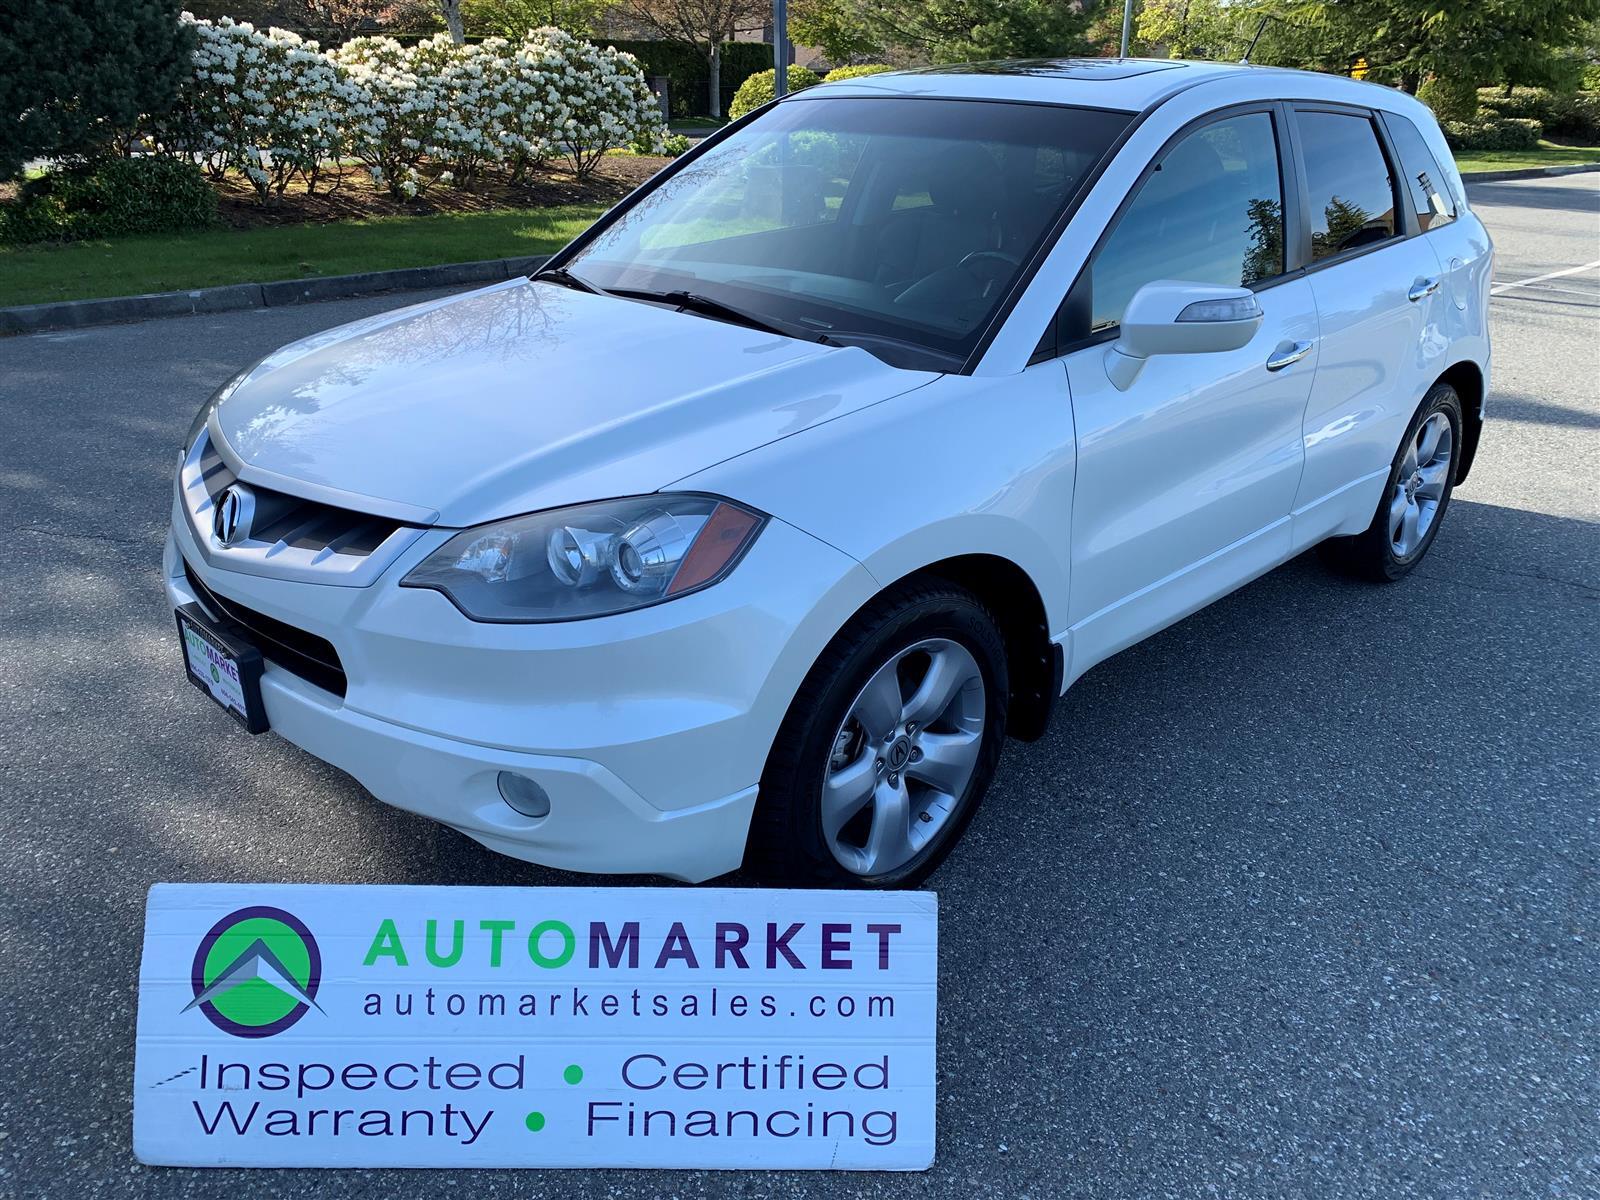 2008 Acura RDX STUNNING CONDITION, FINANCING, WARRANTY, INSPECTED